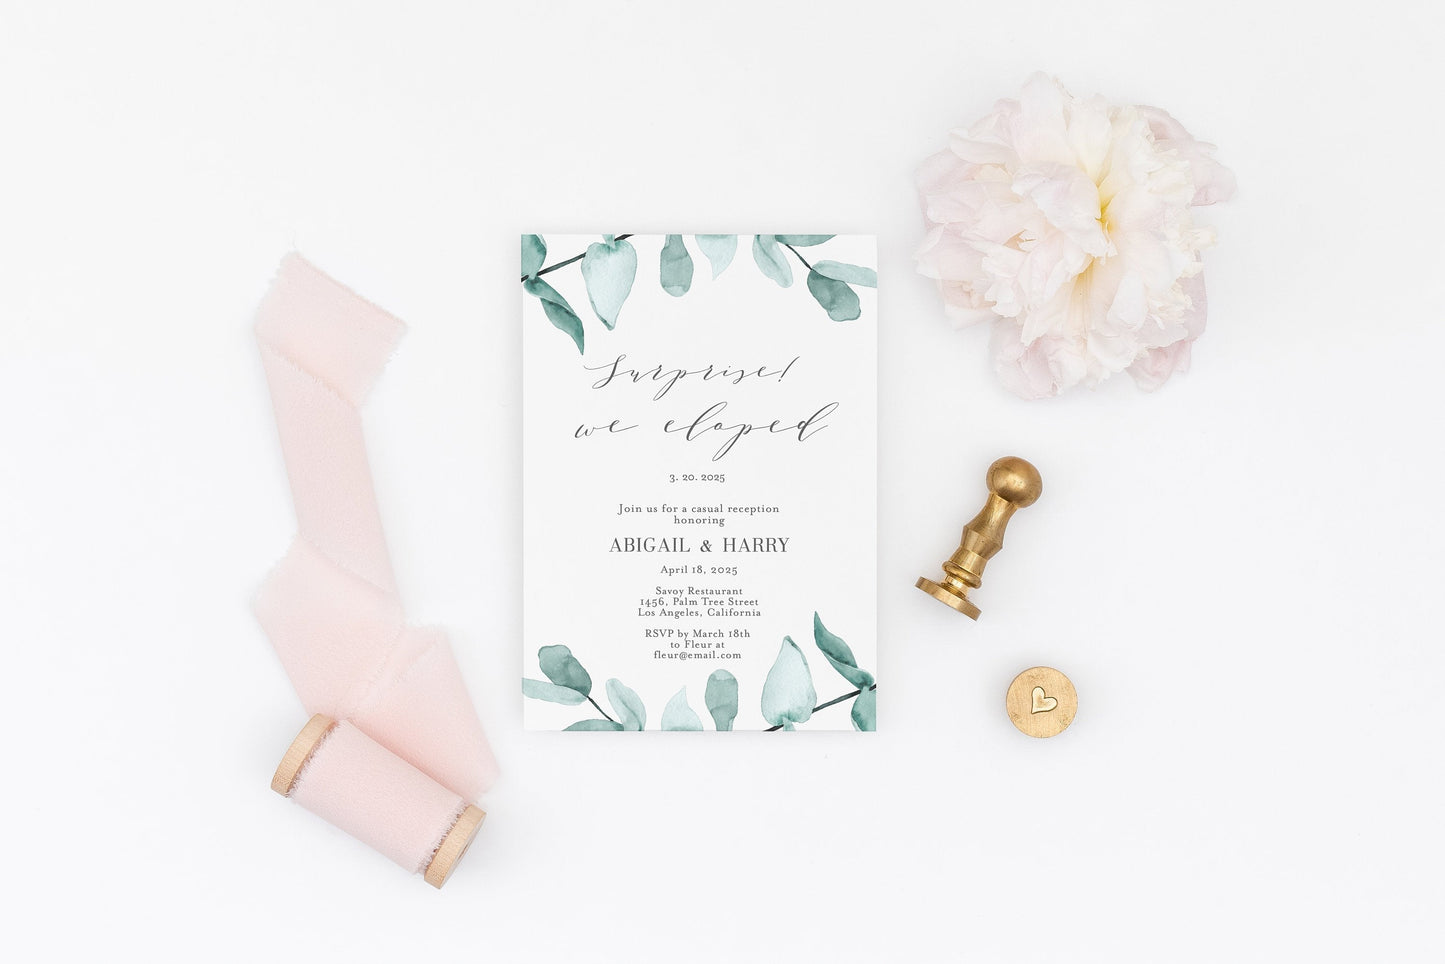 Elopement Wedding Invitation Template, Editable Printable Greenery Wedding Announcement We Tied the Knot Invite 100% editable  - Abi ELOPEMENT SAVVY PAPER CO